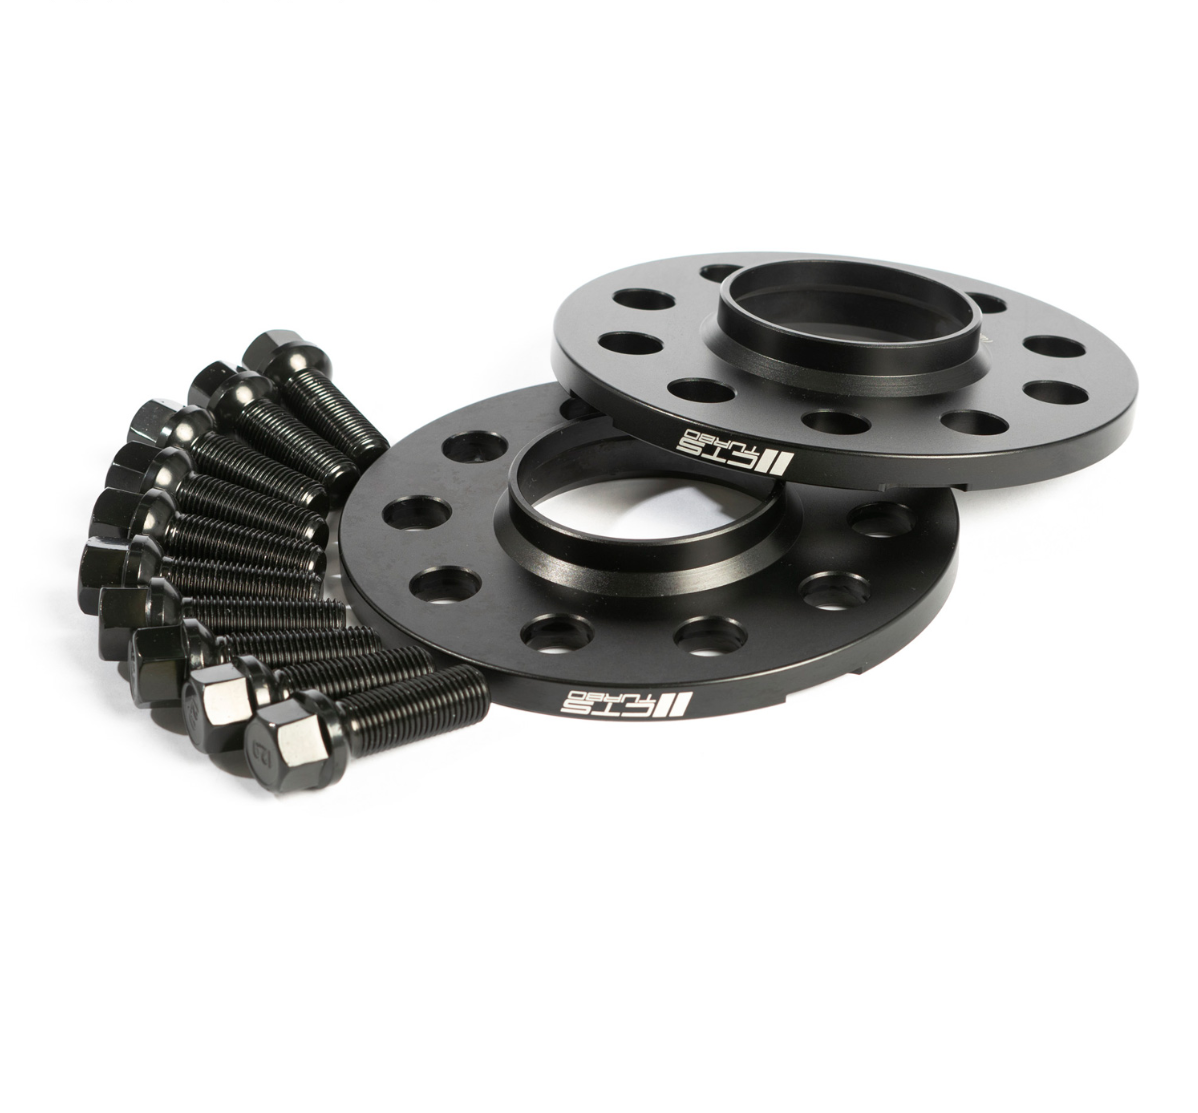 CTS Turbo Hubcentric Wheel Spacers With Lip - 5x112 66.6mm Hub